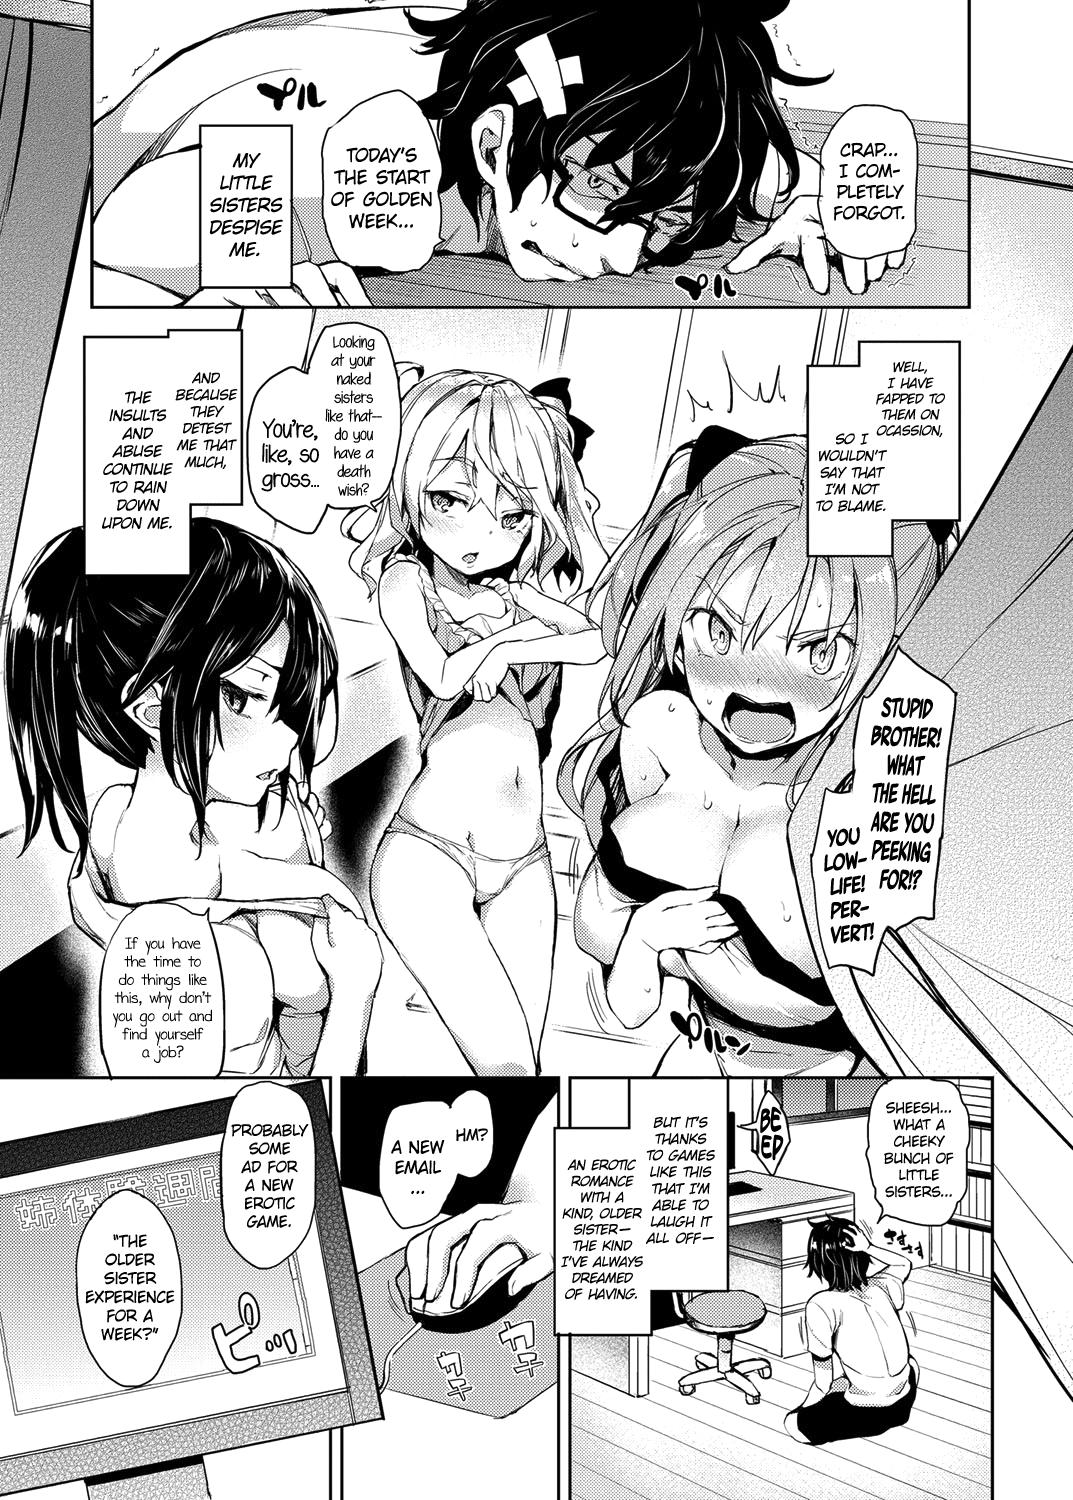 Ane Taiken Shuukan | The Older Sister Experience for a Week Ch. 1 2